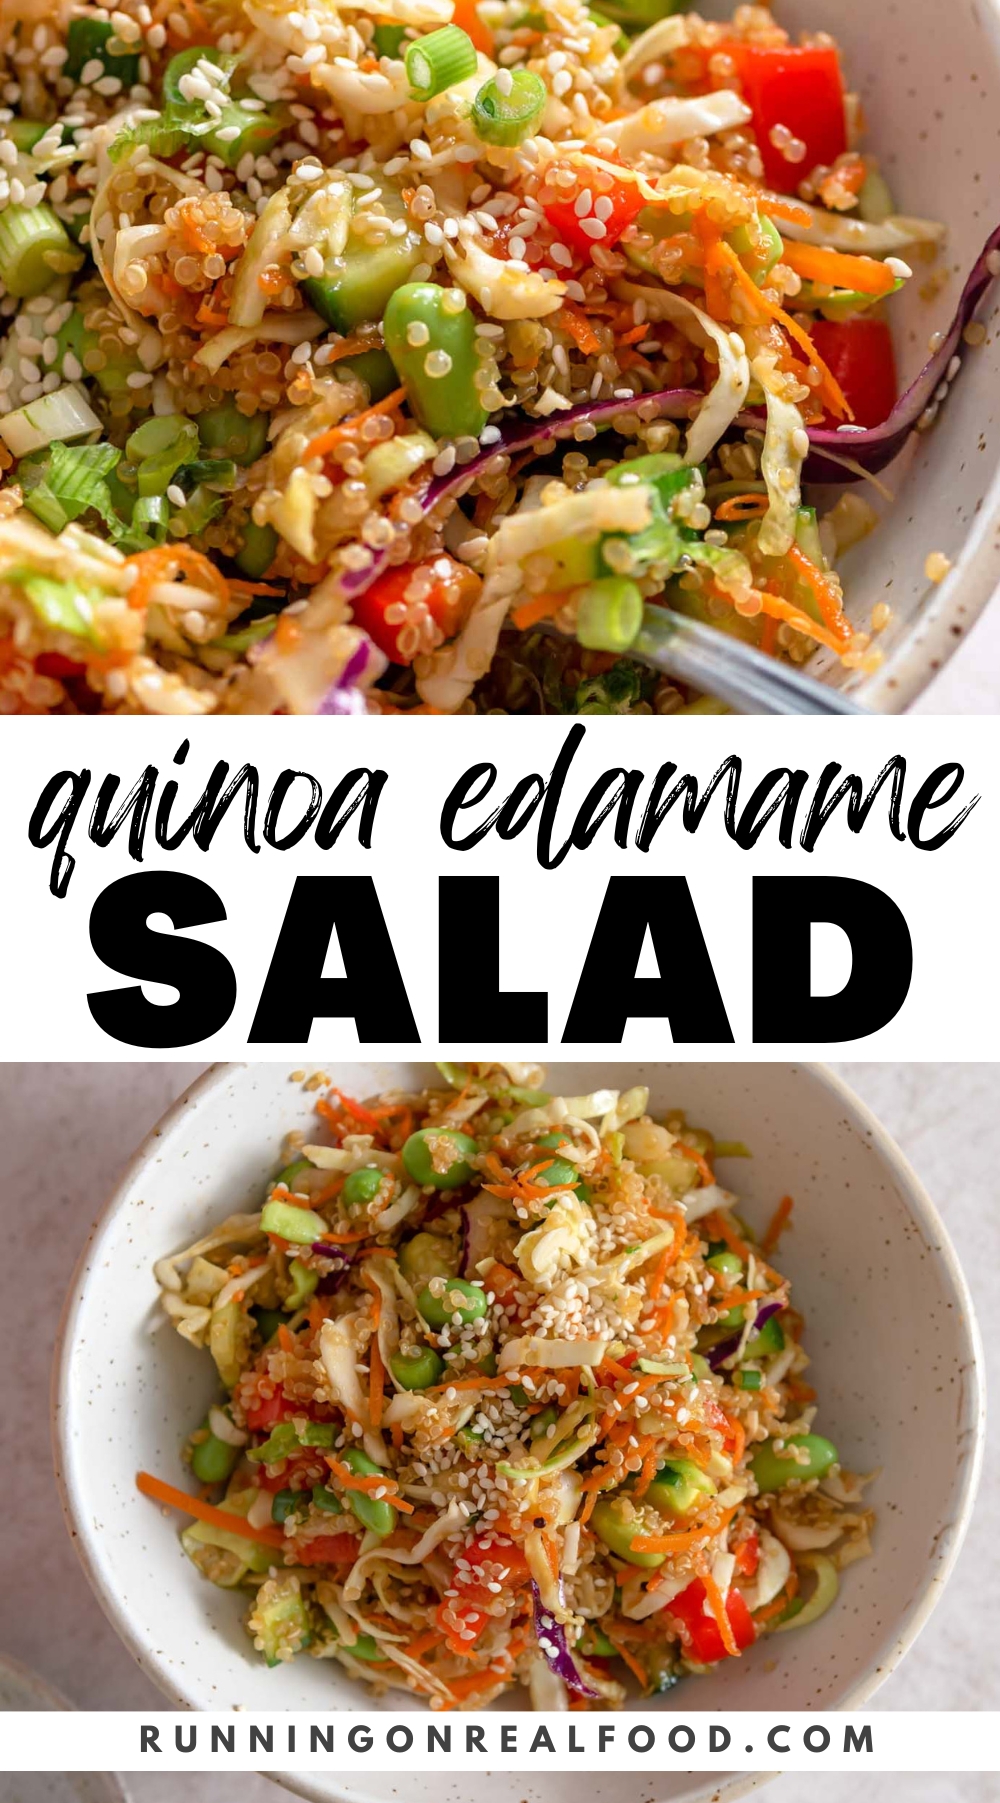 Pinterest graphic for an edamame quinoa salad with two images of the salad and stylized text title.